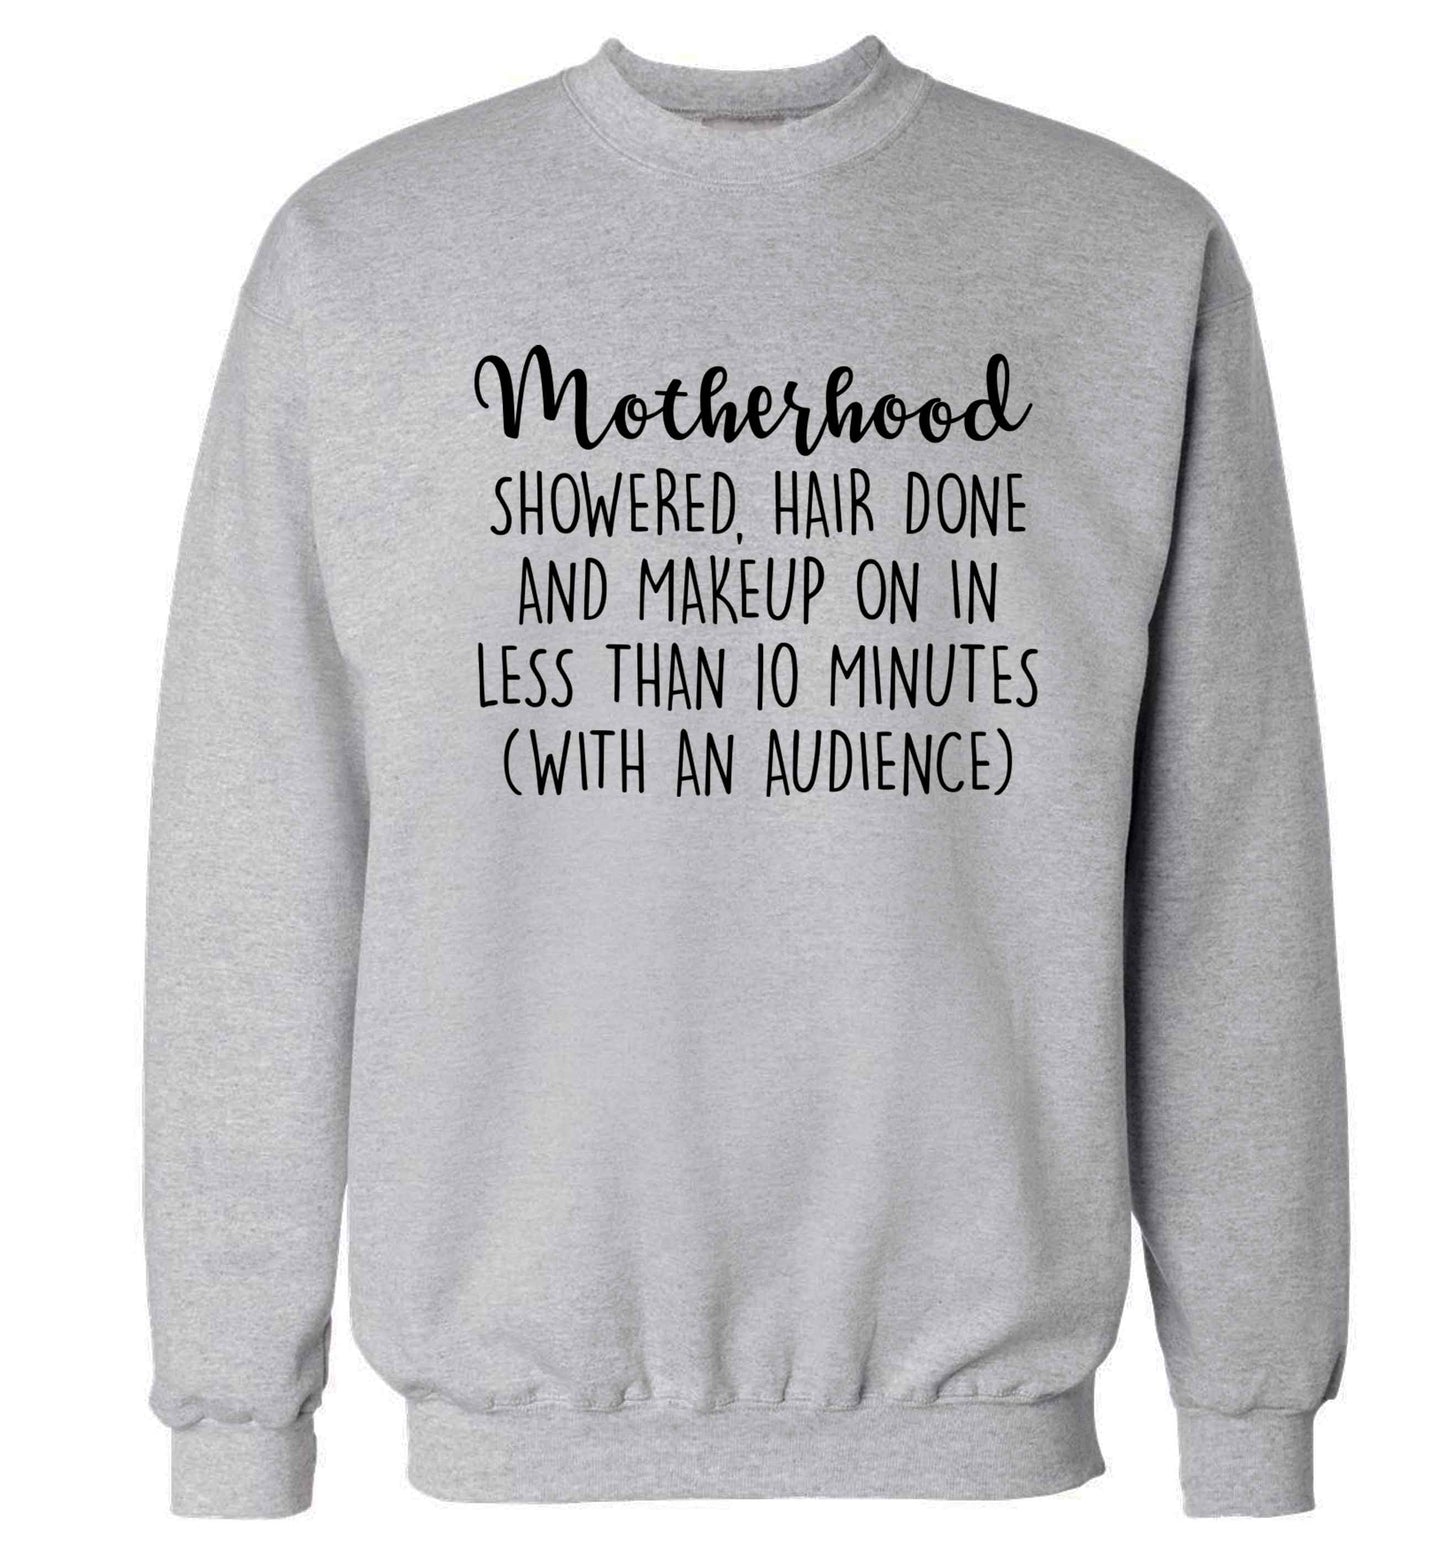 Motherhood, showered, hair done and makeup on Adult's unisex grey Sweater 2XL